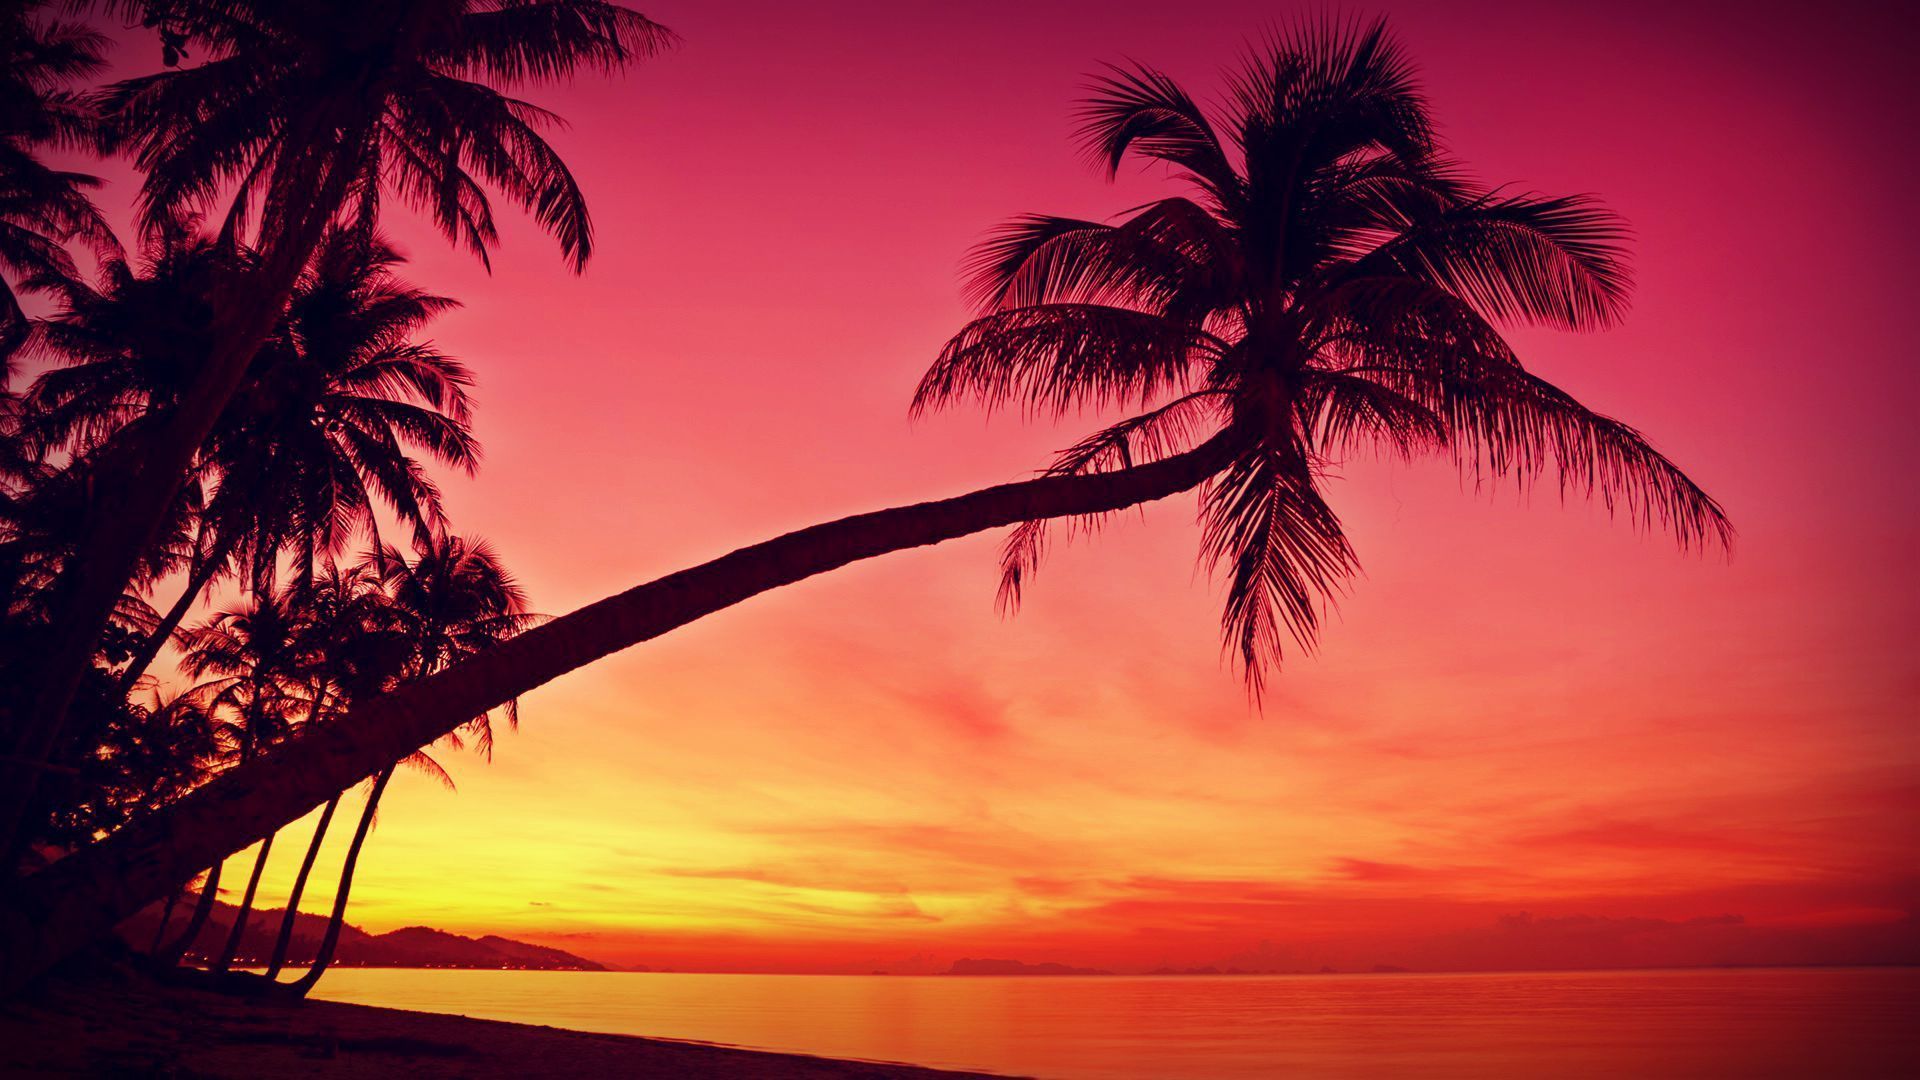 Hawaiian Sunsets On The Beach Wallpapers Wallpaper Cave